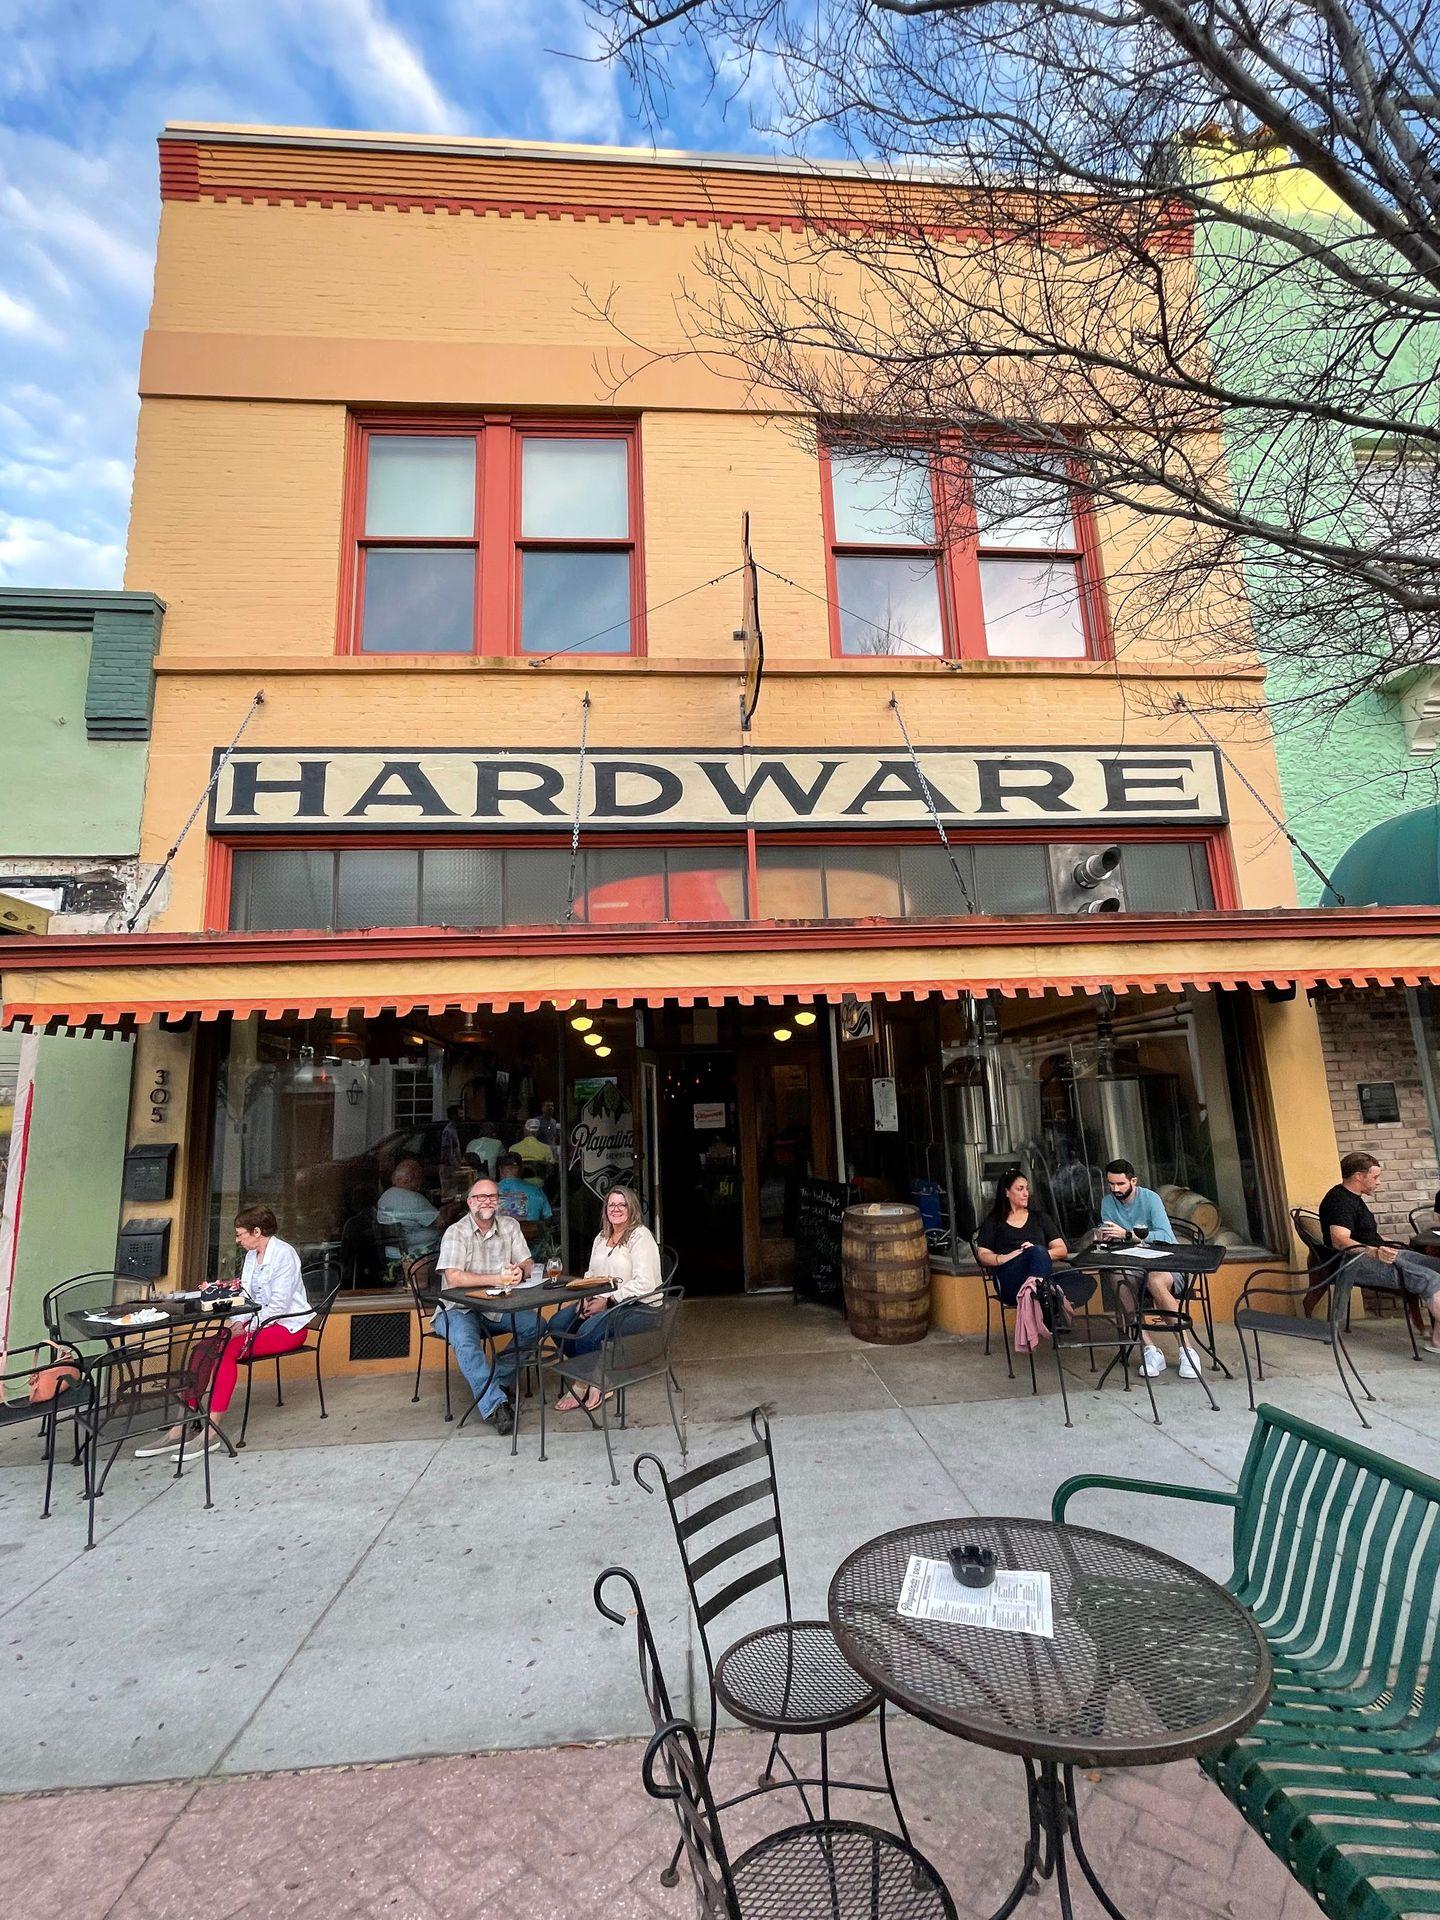 A yellow building labeled 'hardware' with tables out front.